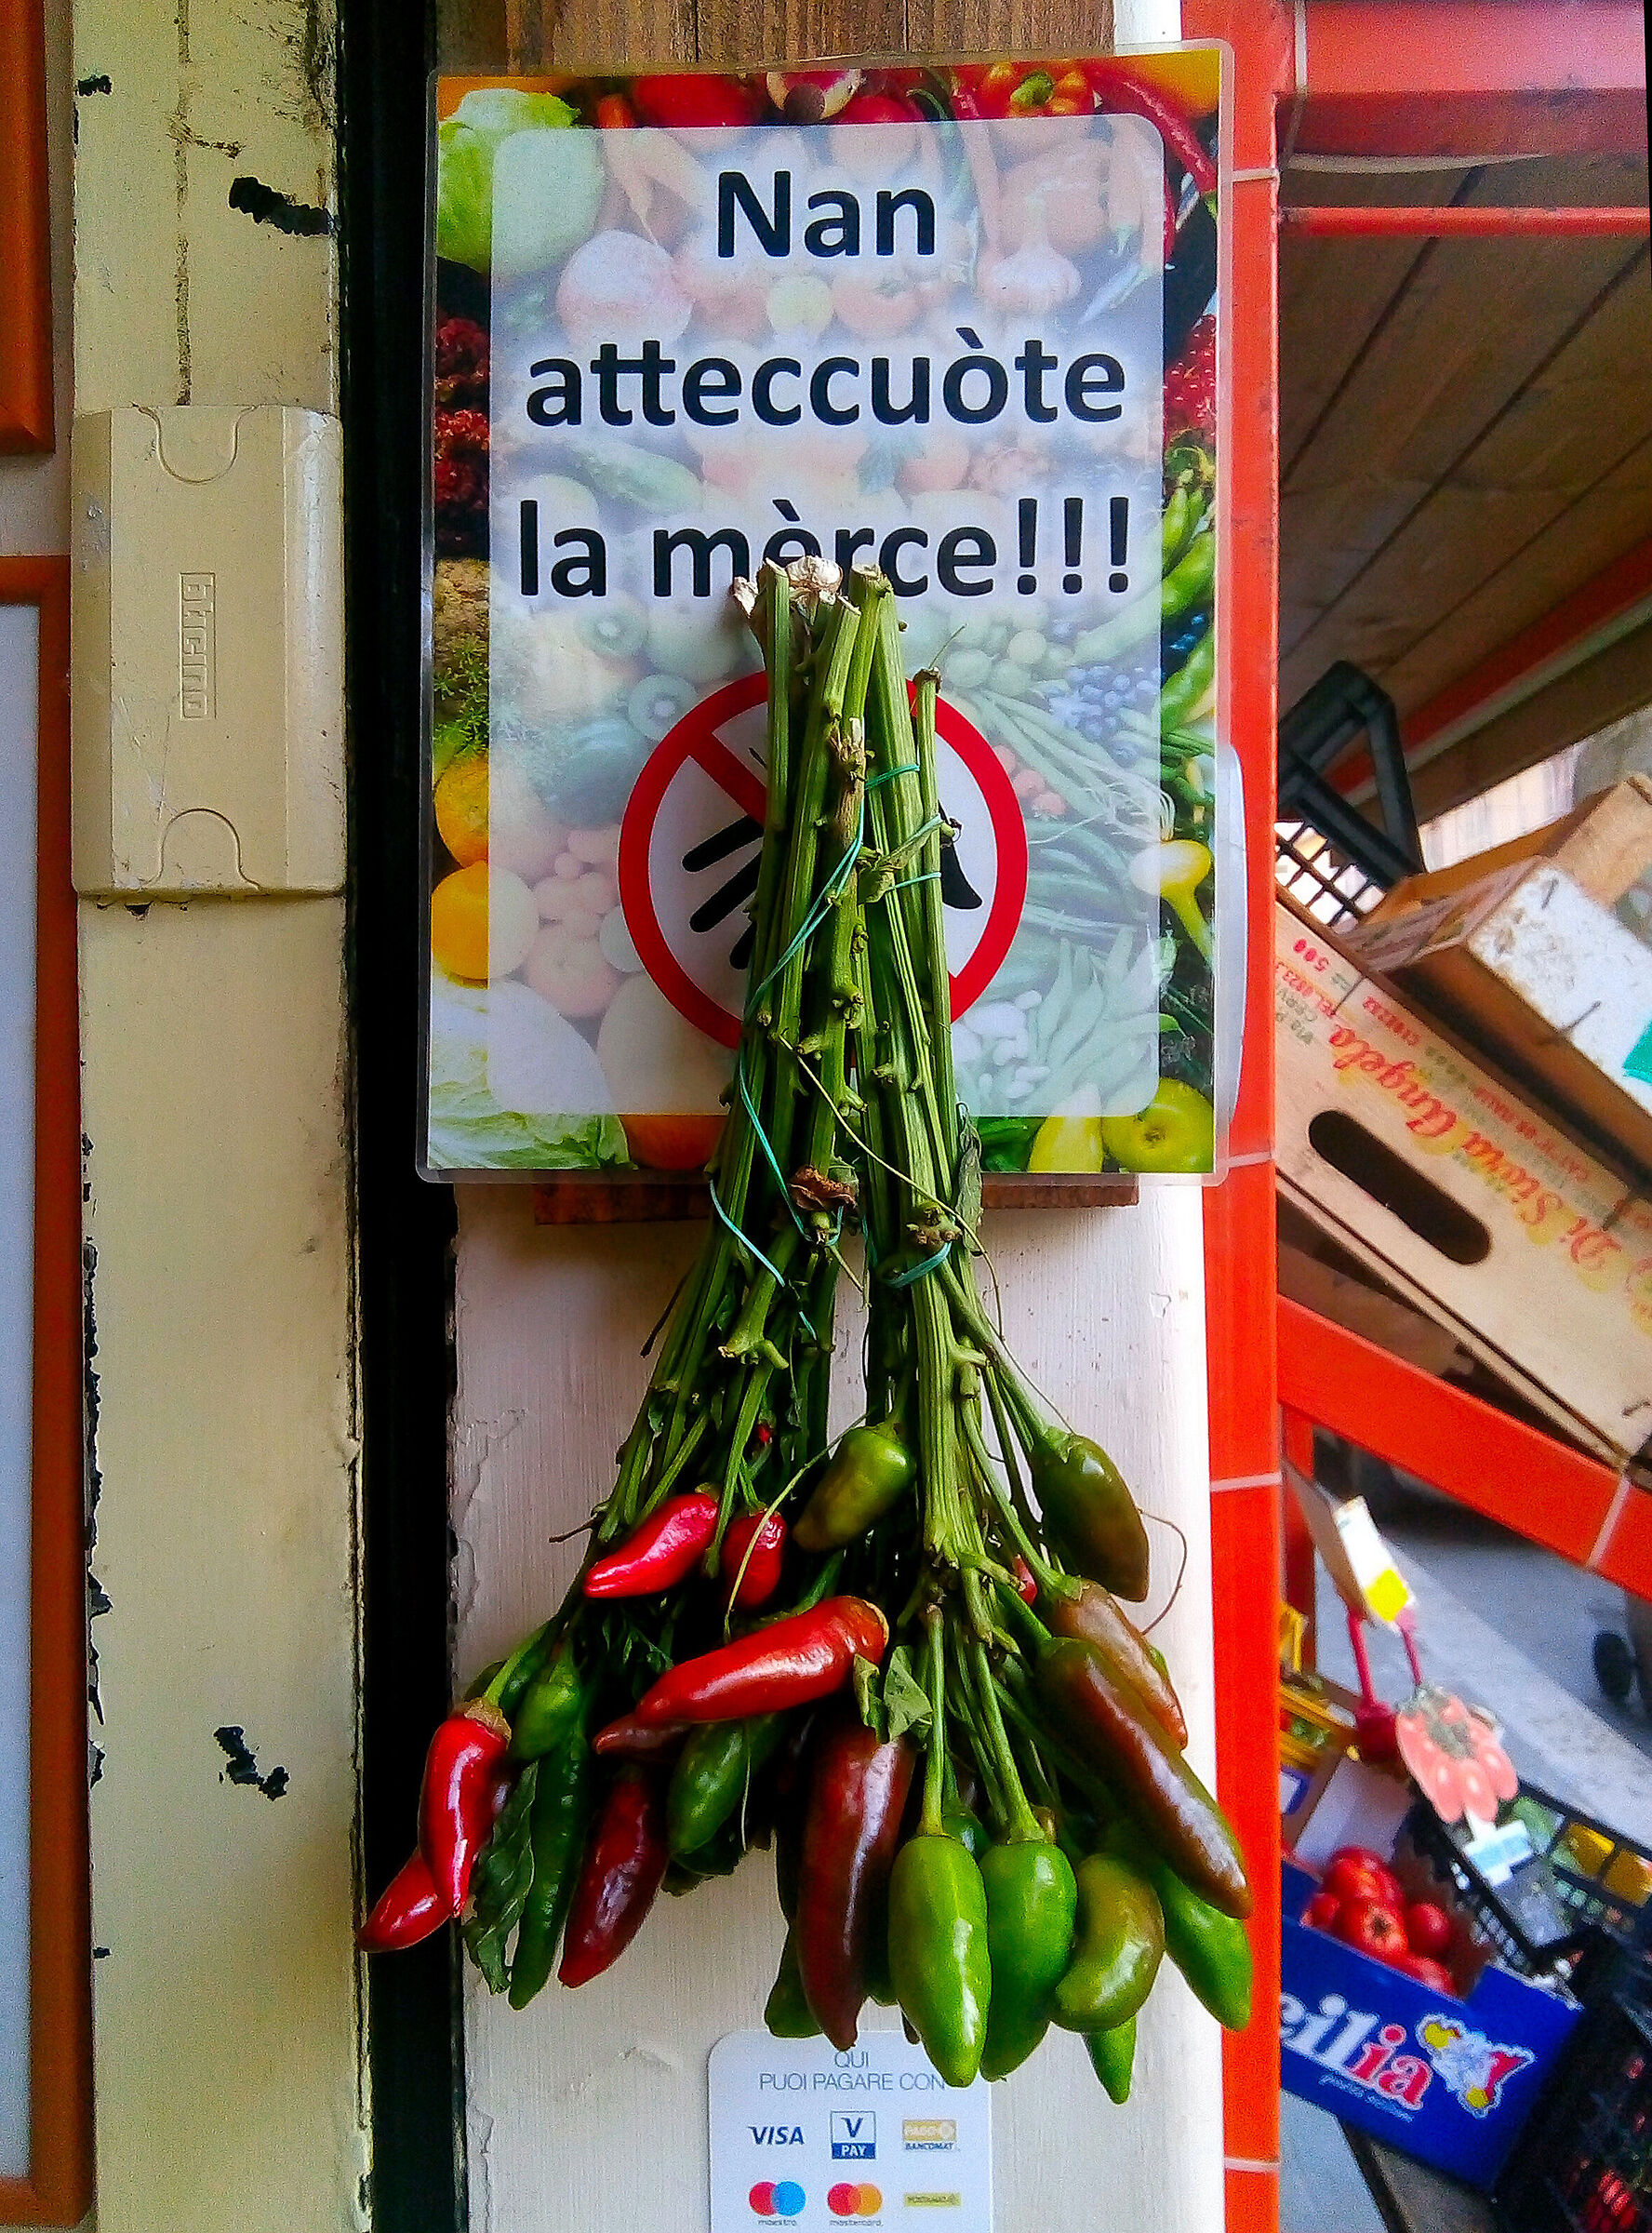 Notice to Bisceglie: is it clear? "Do not touch the goods"...